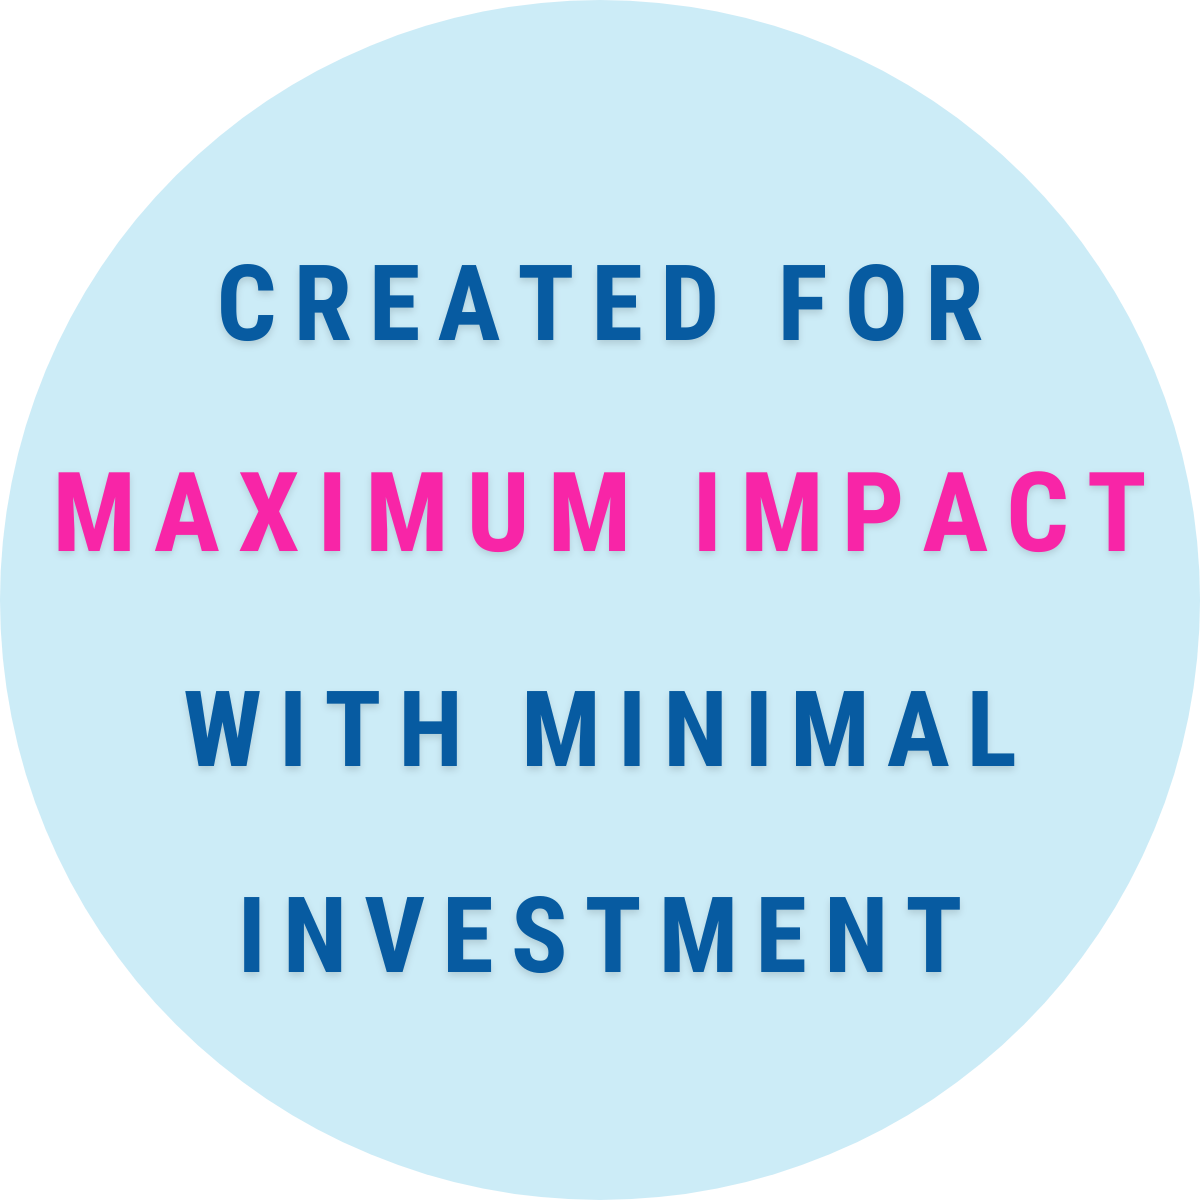 An image with copy describing on online course about ADHD that says 'created for maximum impact with minimal investment'